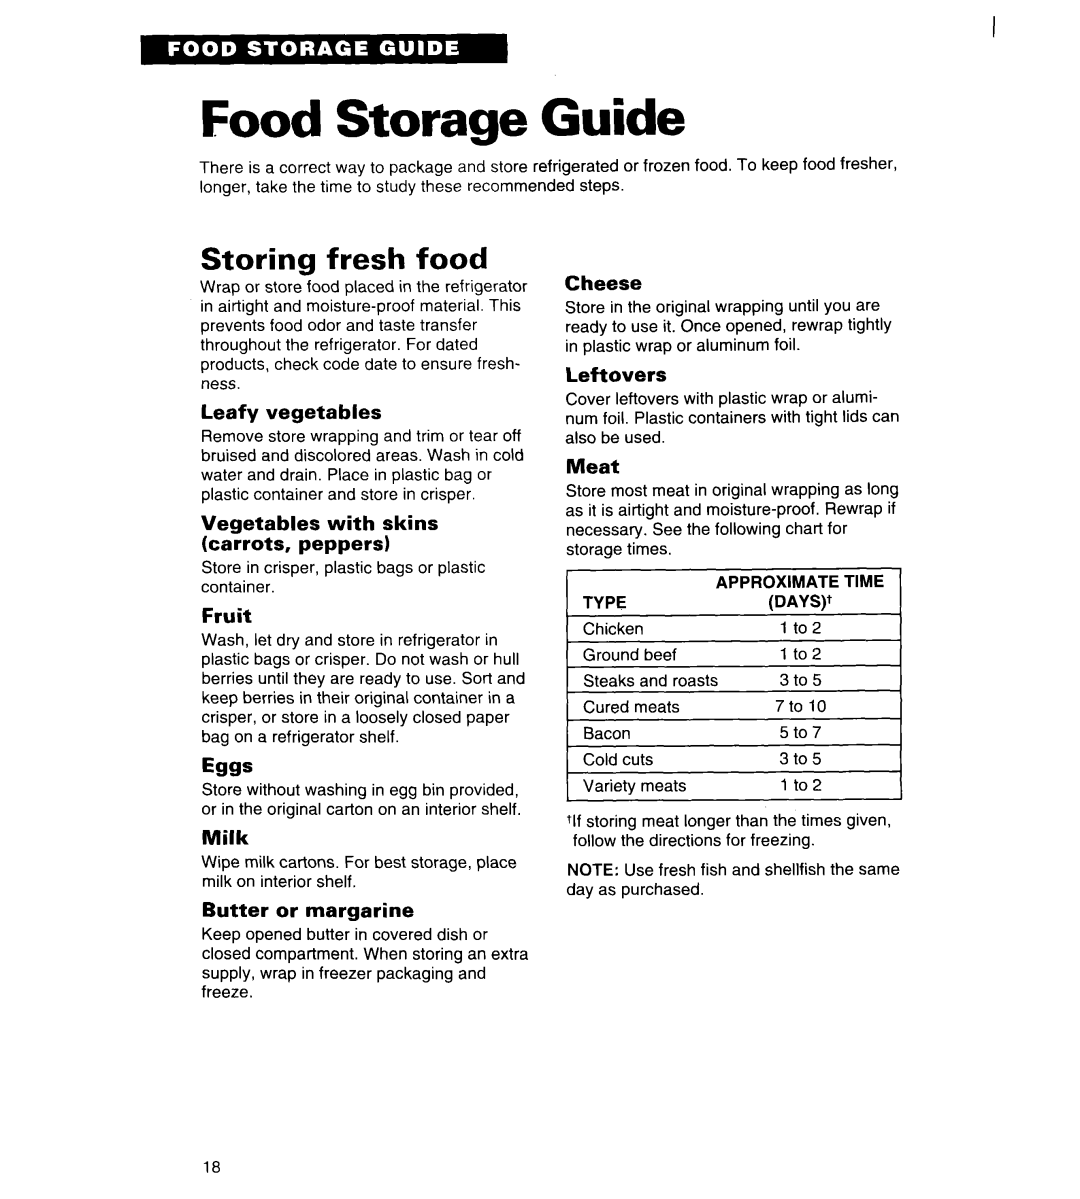 Whirlpool 4ED20ZK Food Storage Guide, Storing fresh food, Leafy vegetables, Vegetables with skins carrots, peppers, Fruit 